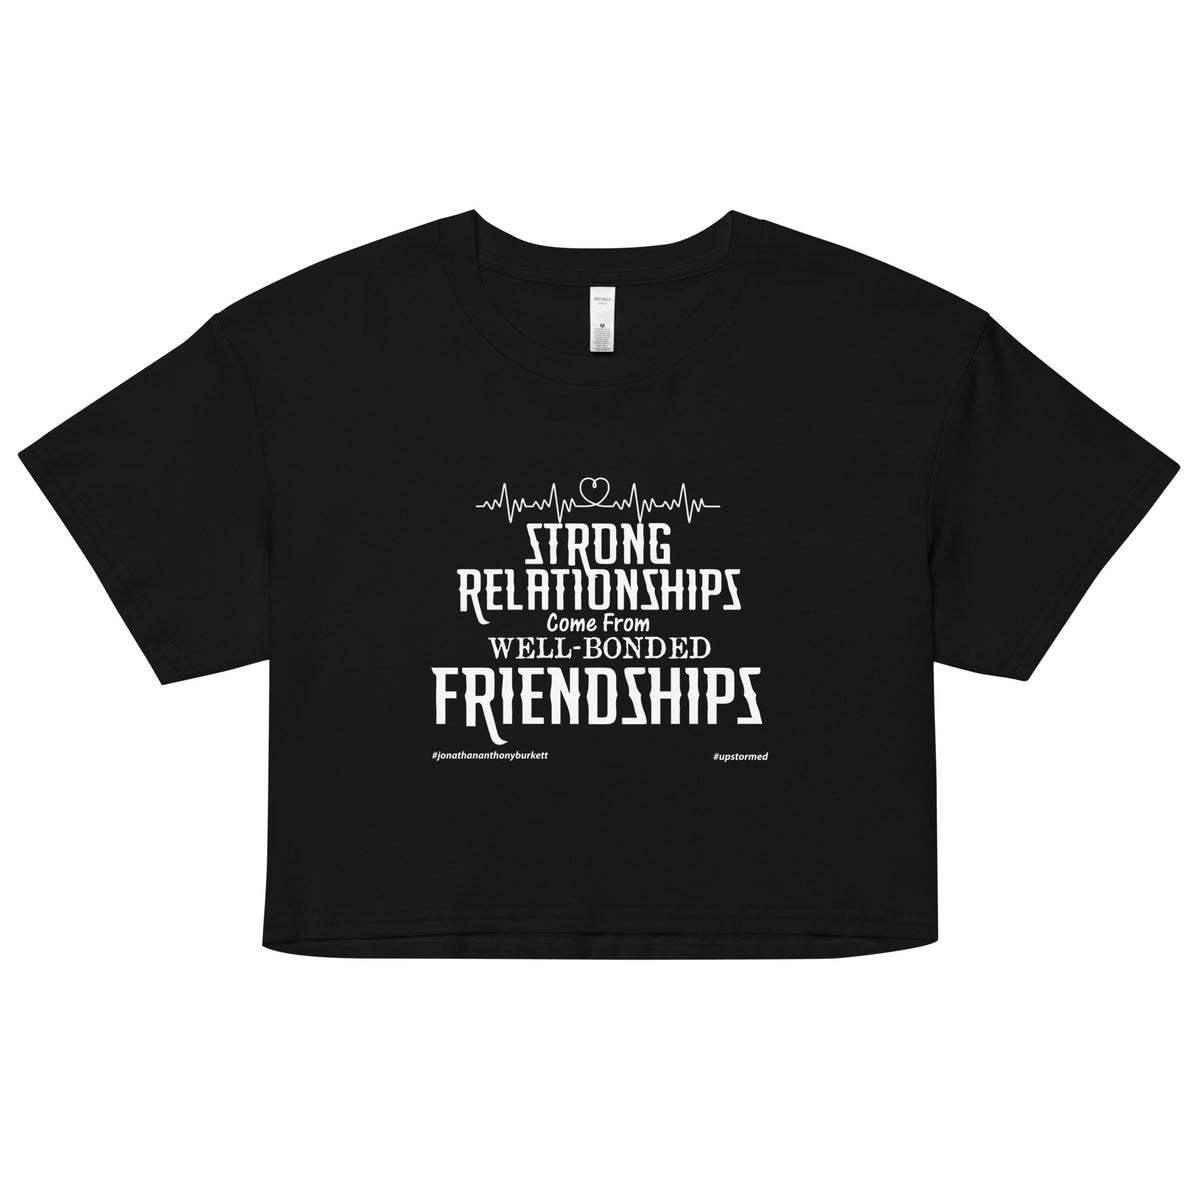 Strong Relationships Comes From Well-Bonded Friendships Upstormed Women’s Crop Top